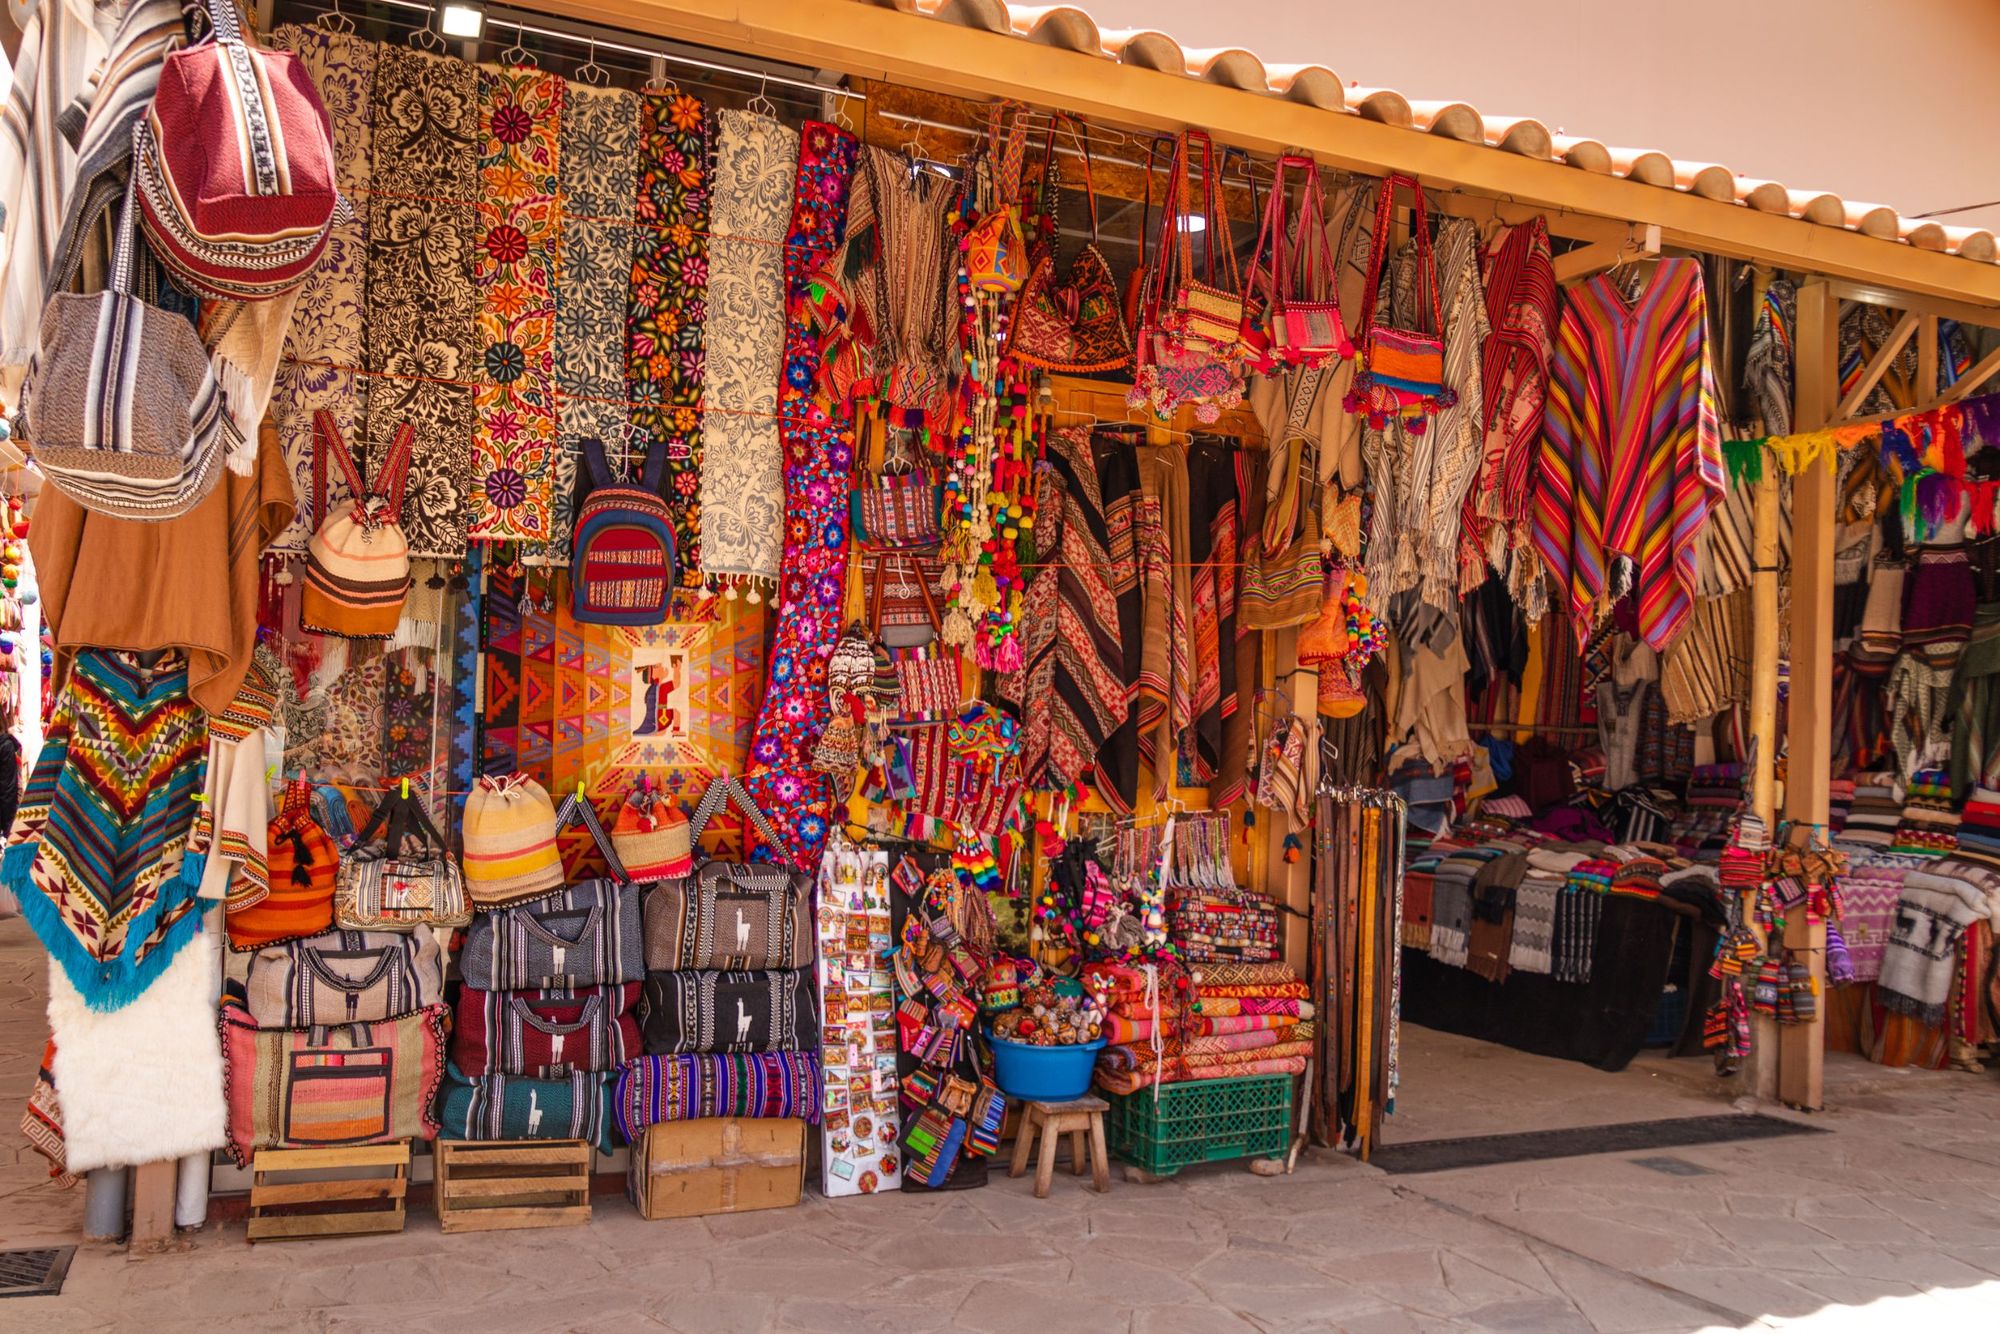 Souvenirs at the Pisac artisan market, from ponchos to blankets and satchels. Photo: Getty